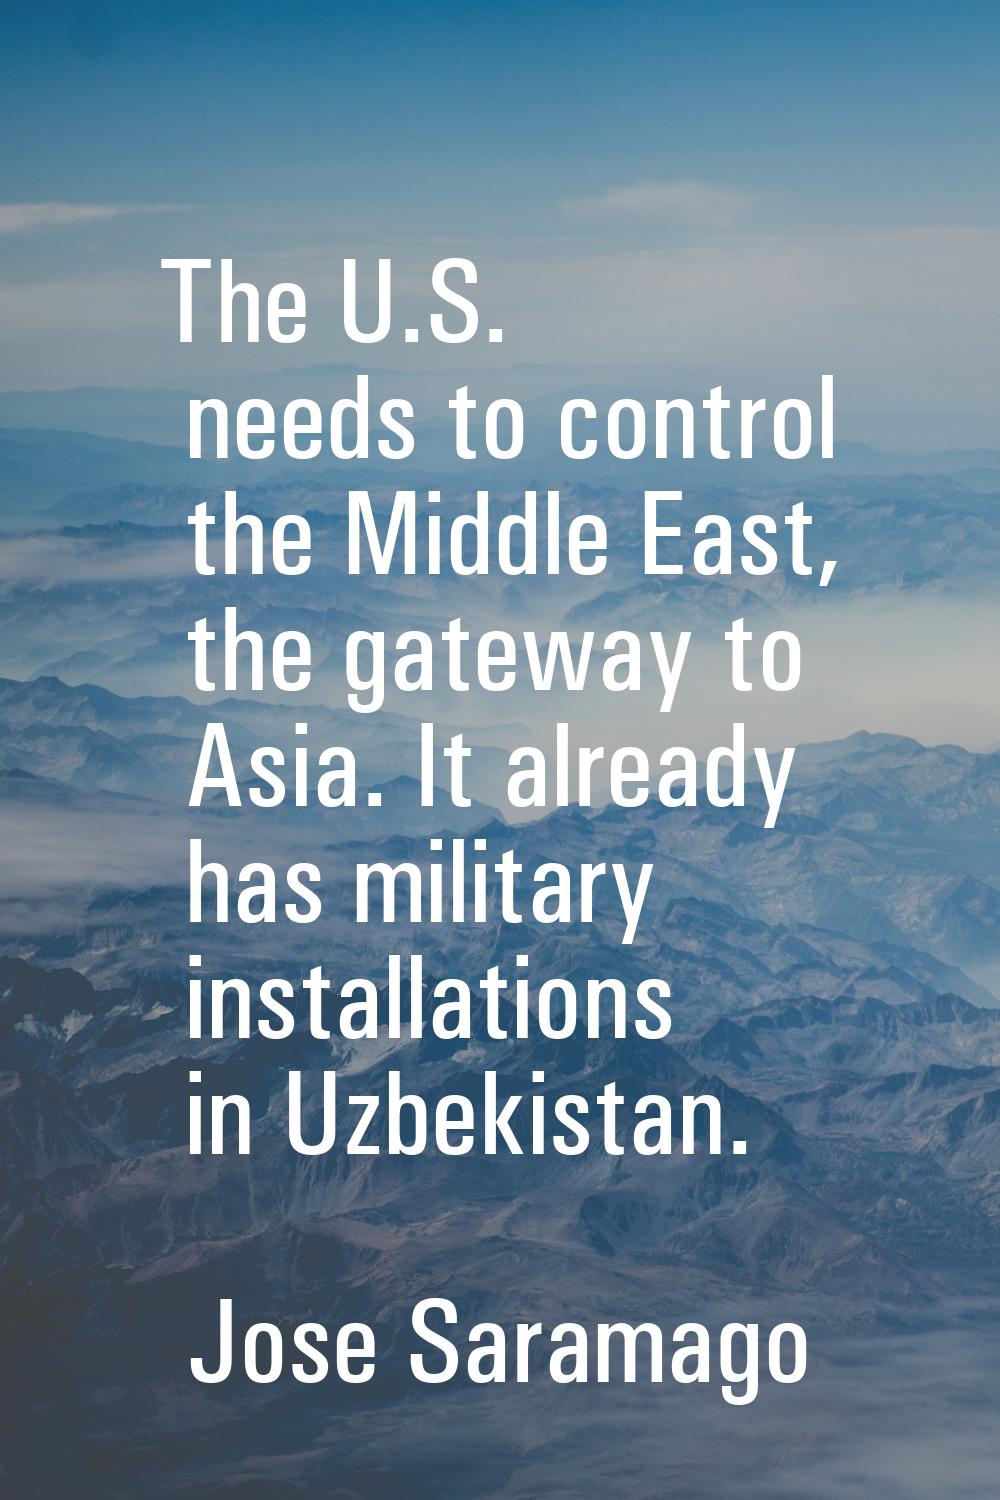 The U.S. needs to control the Middle East, the gateway to Asia. It already has military installatio